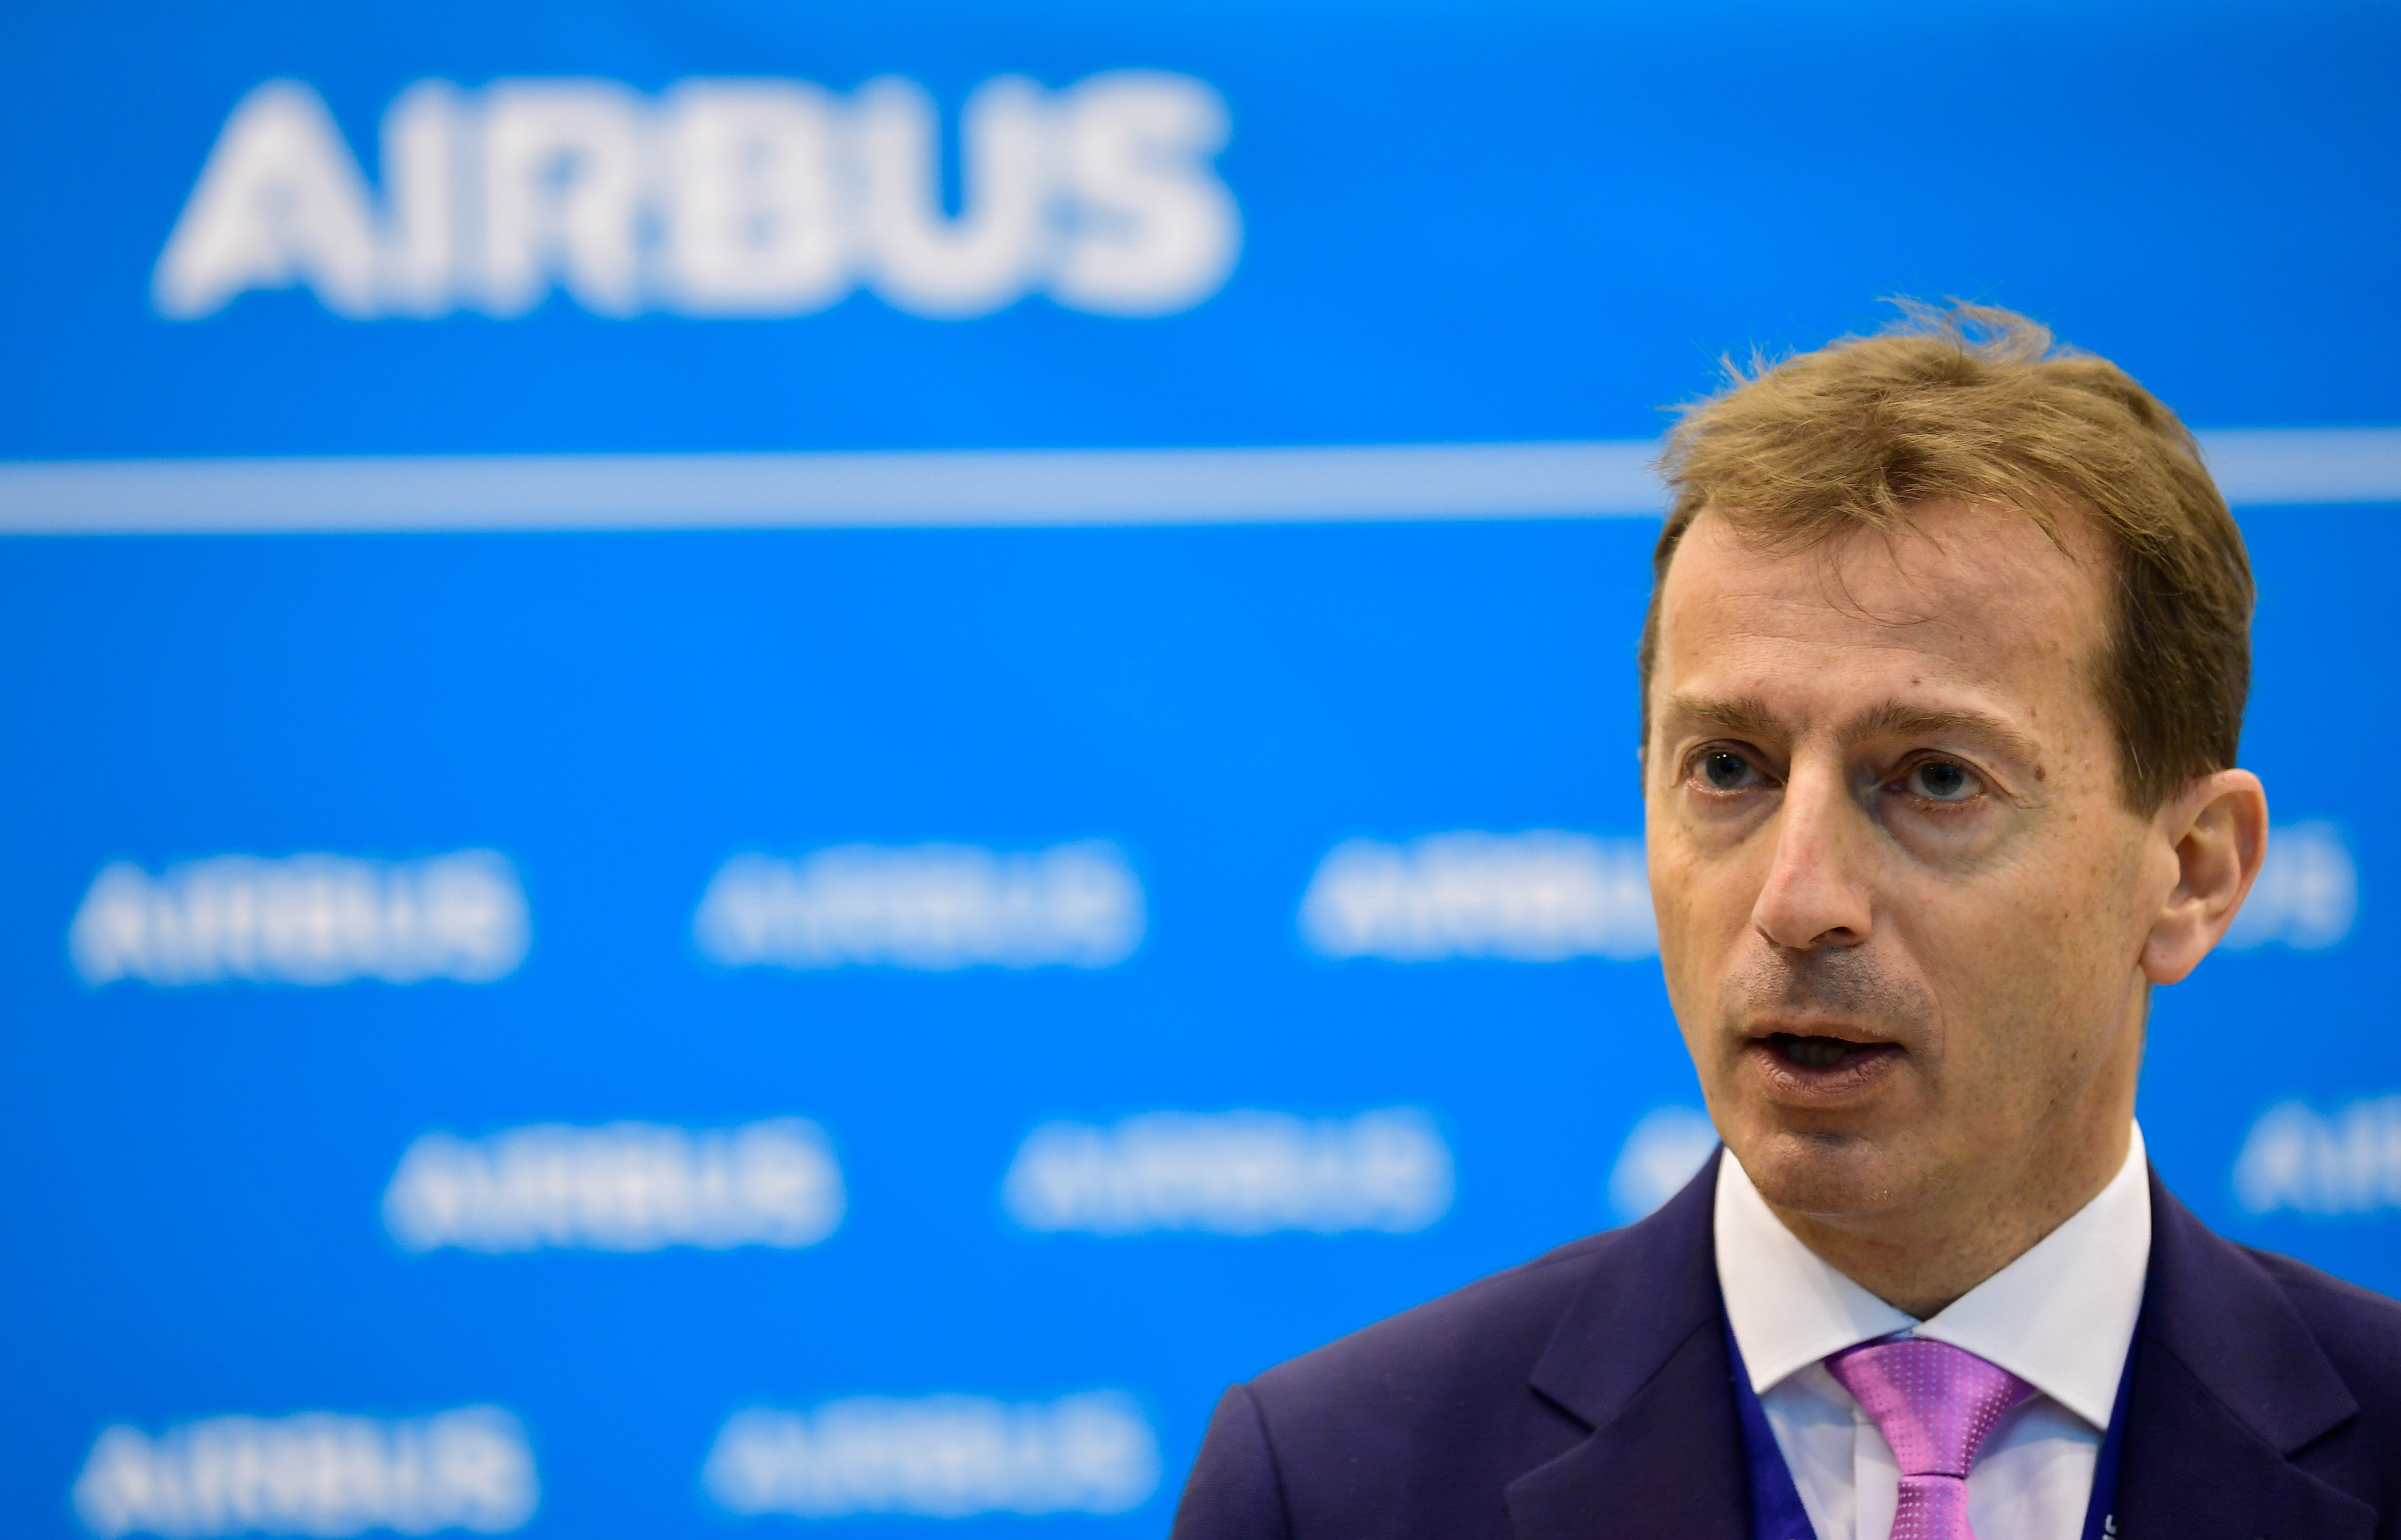 German Economy and Climate Protection Minister Habeck visits Airbus facilities in Hamburg